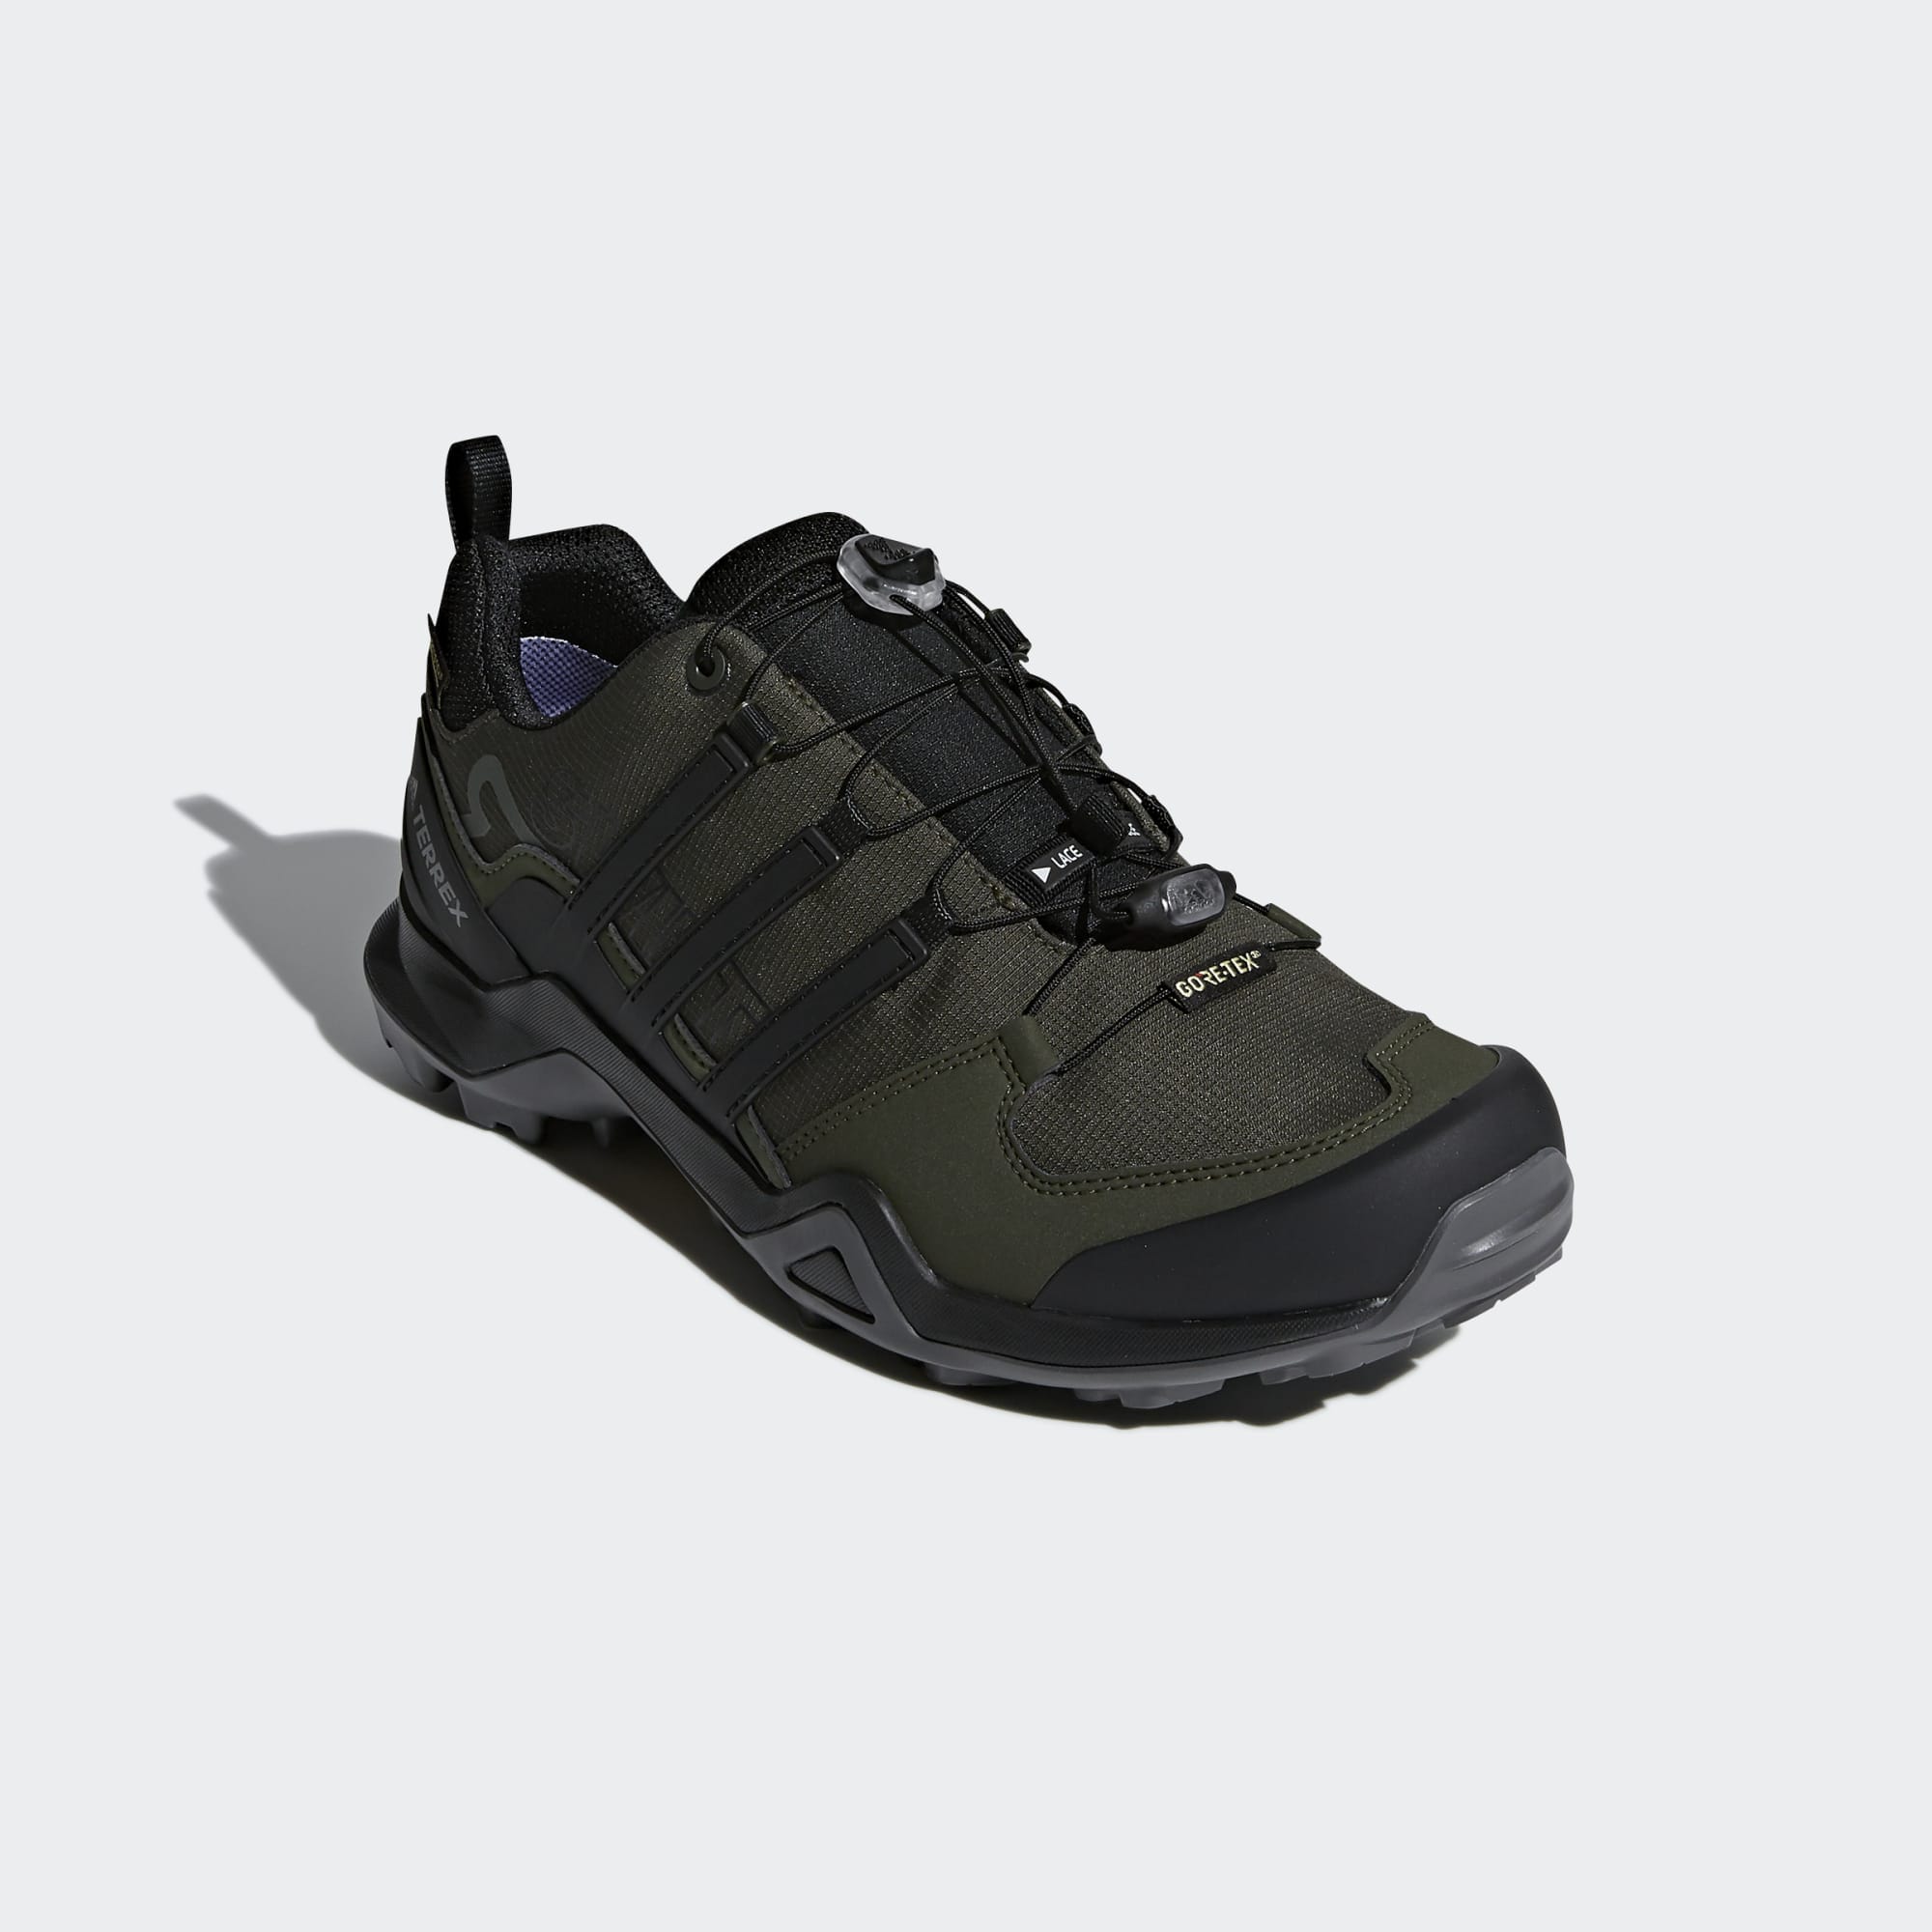 Men's adidas Terrex Swift R2 Gore-Tex Hiking Shoe in Night Cargo / Core Black / Base Green from the side view